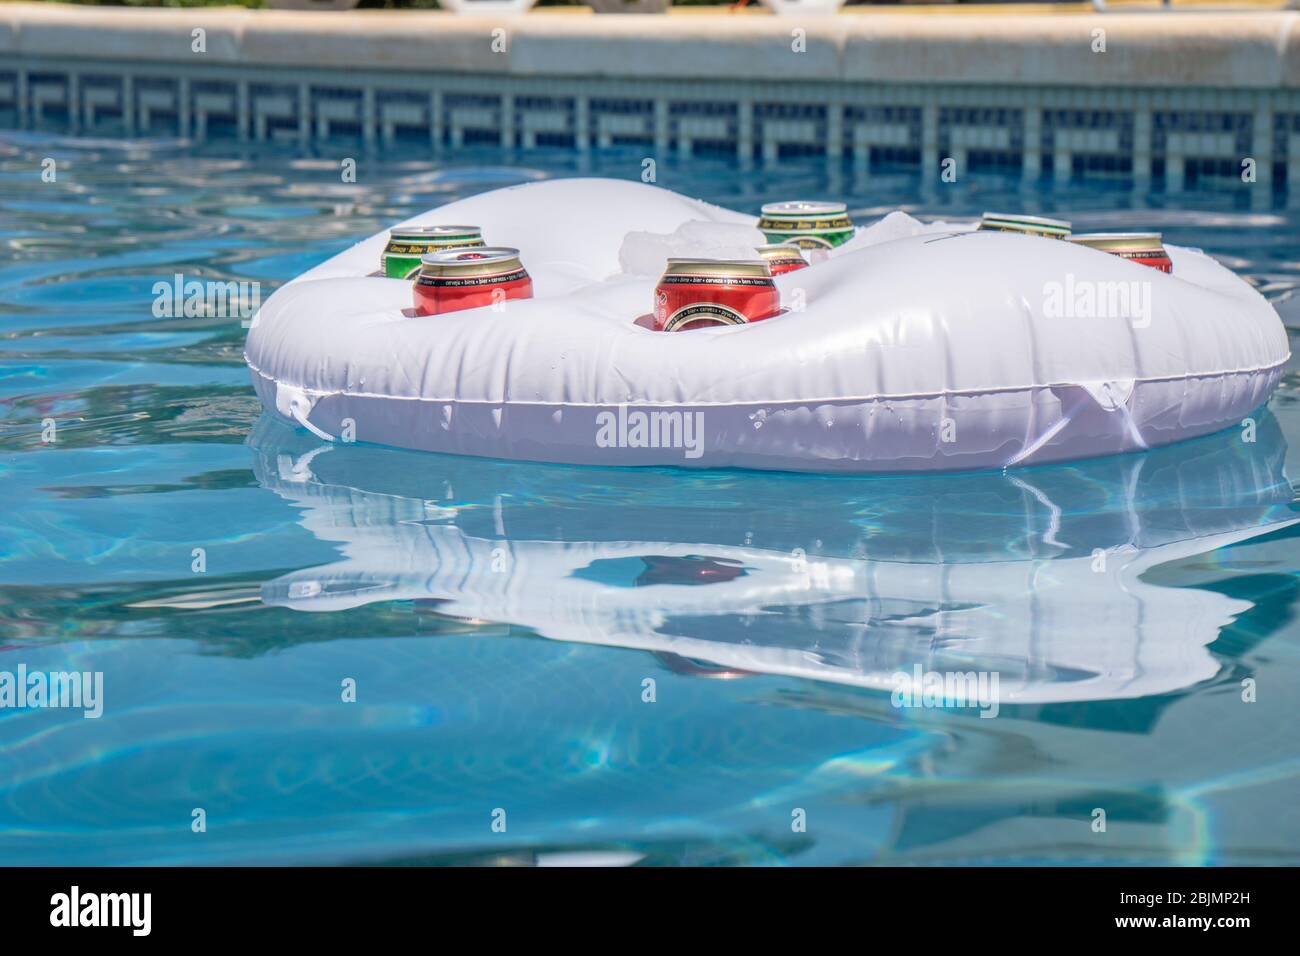 Swimming pool with cans of beer in a floating drinks cooler Stock Photo